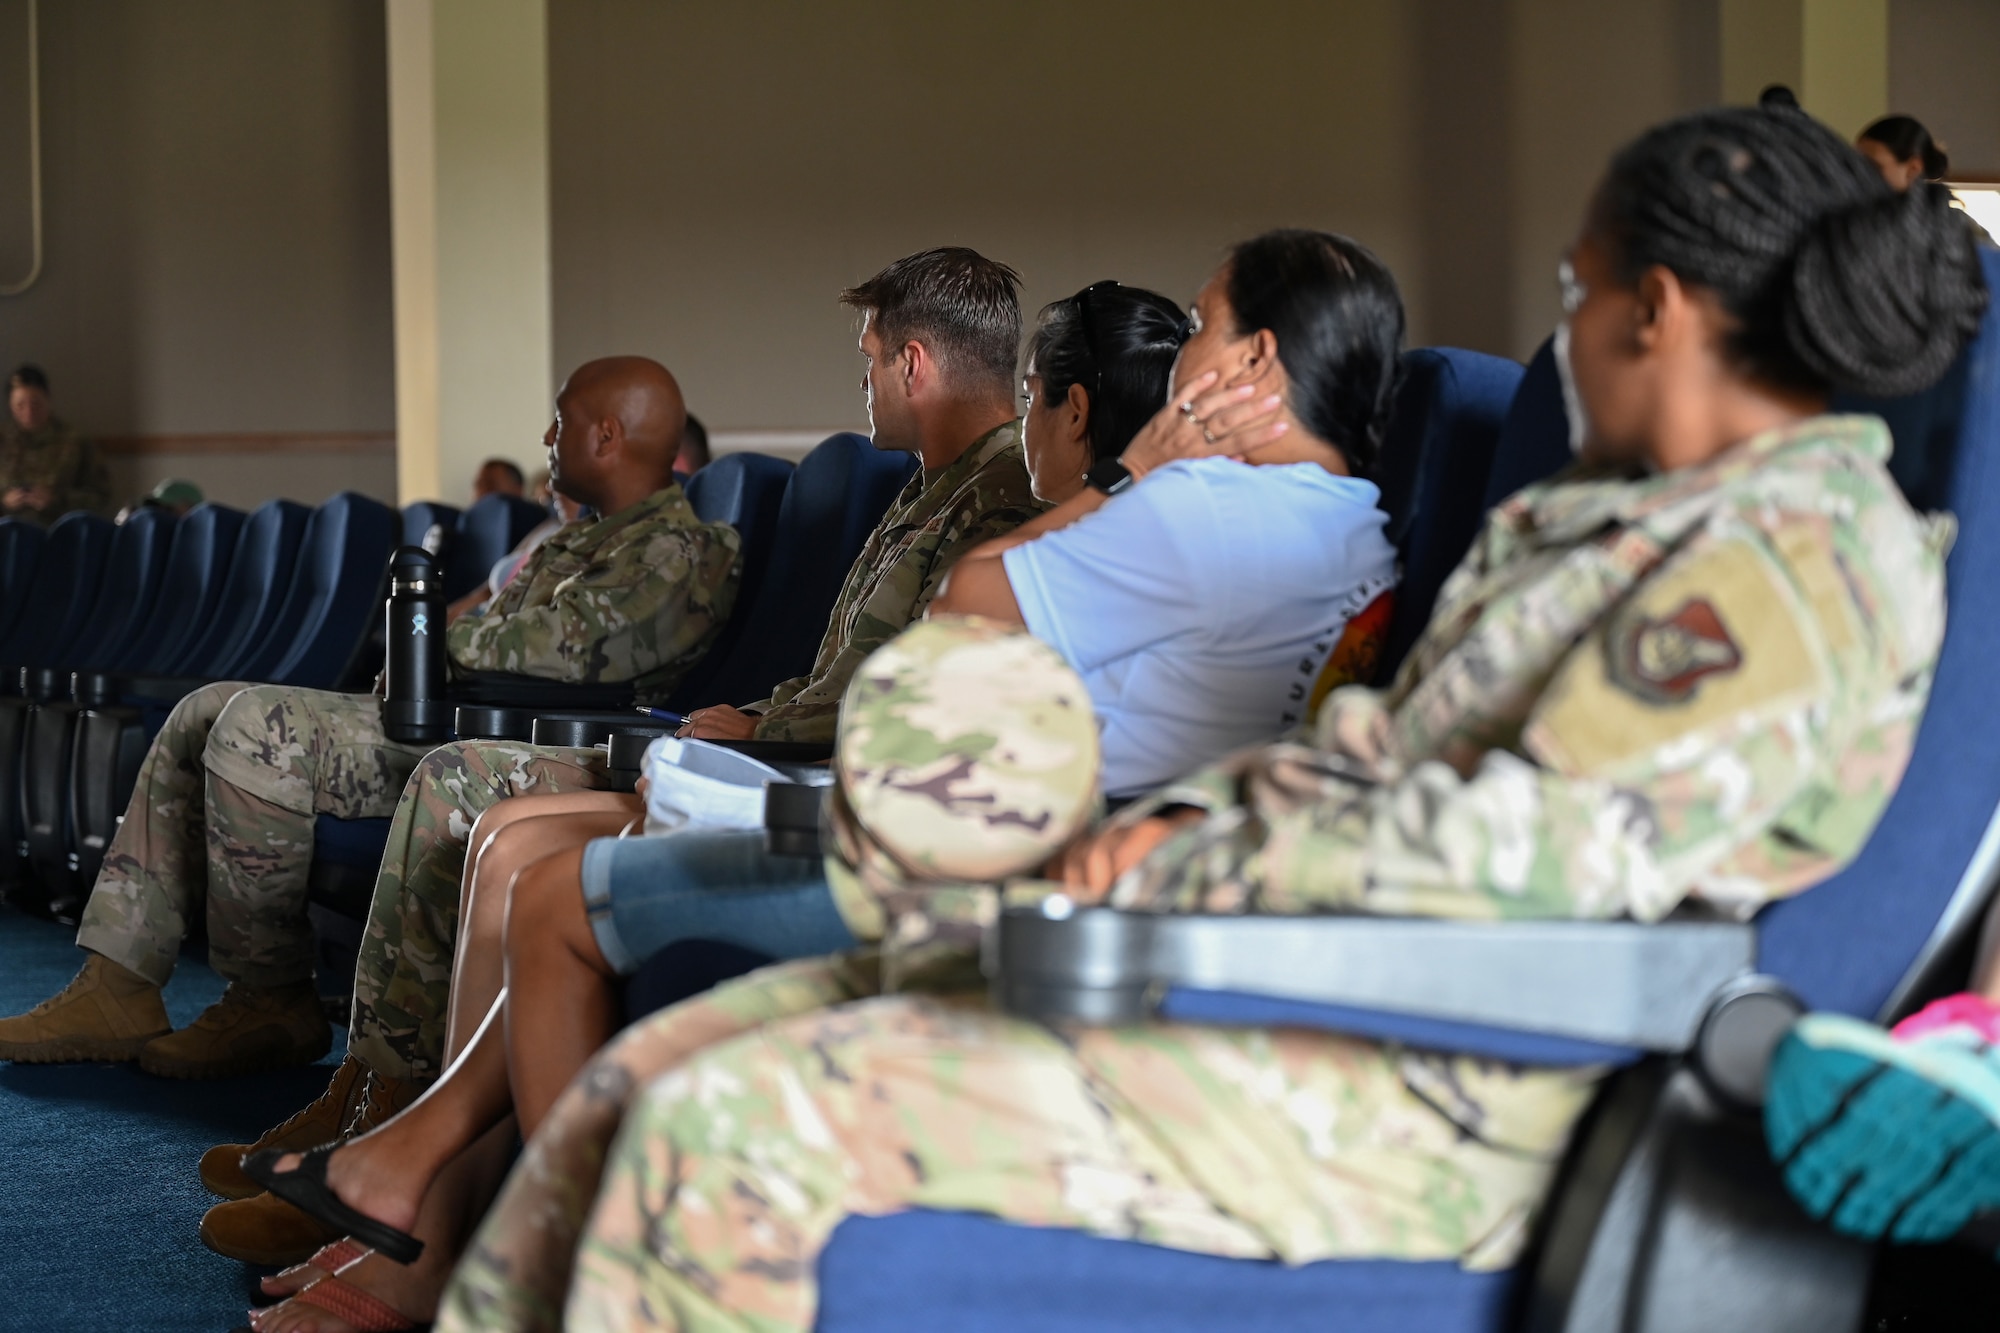 U.S. Air Force service members, civilian employees and dependents listen to base condition updates during a town hall following Super Typhoon Mawar at Andersen Air Force Base, Guam, May 29, 2023. Fast discussed recovery priorities on base; command, control and communication, sustainment of life, open airfield, helping the community of Guam and recovering facilities. (U.S. Air Force photo by Senior Airman Kaitlyn Preston)